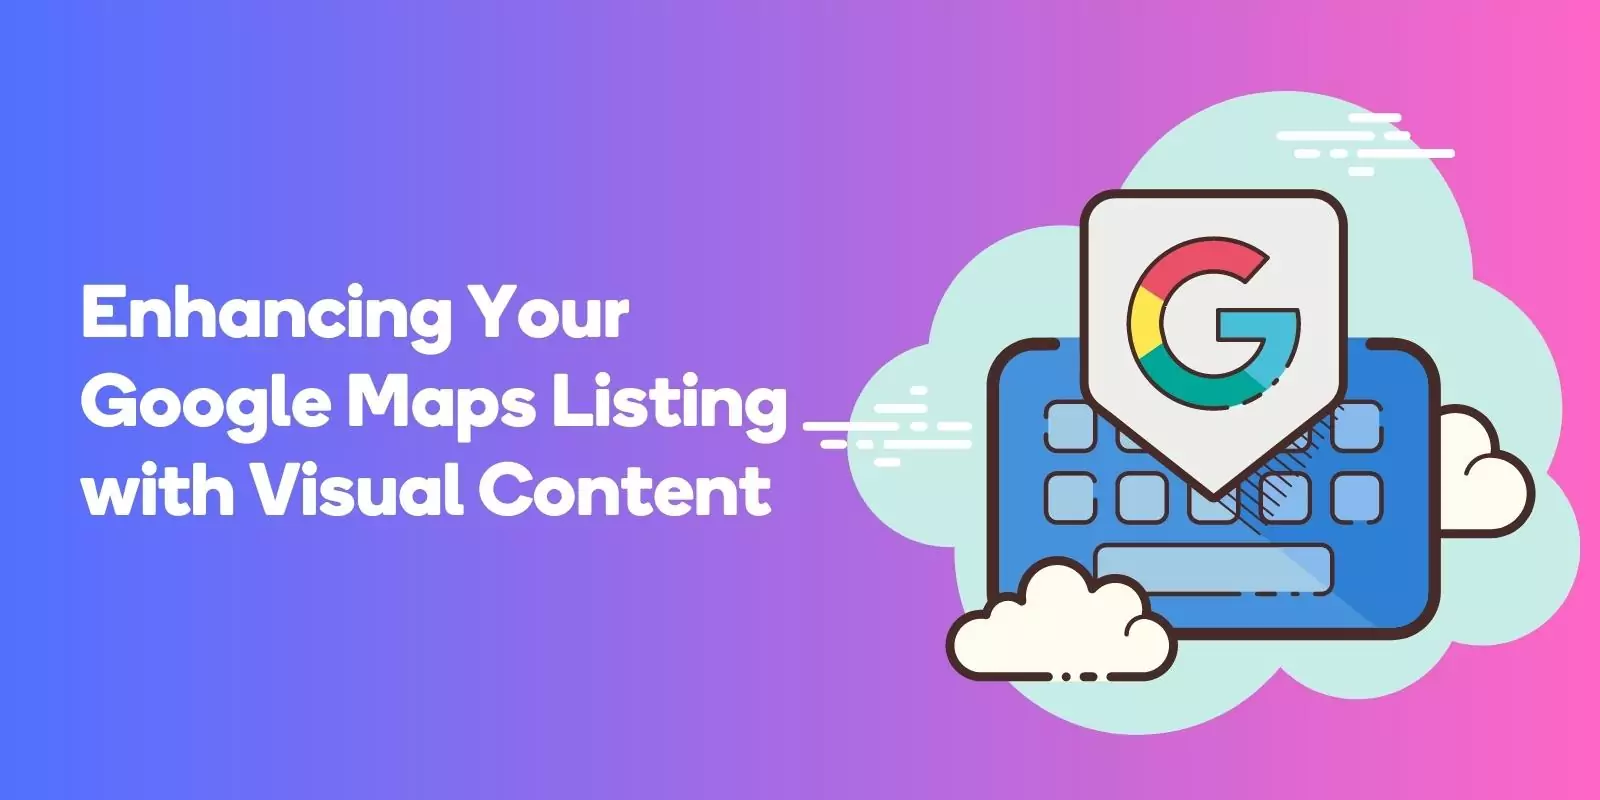 Enhancing Your Google Maps Listing with Visual Content